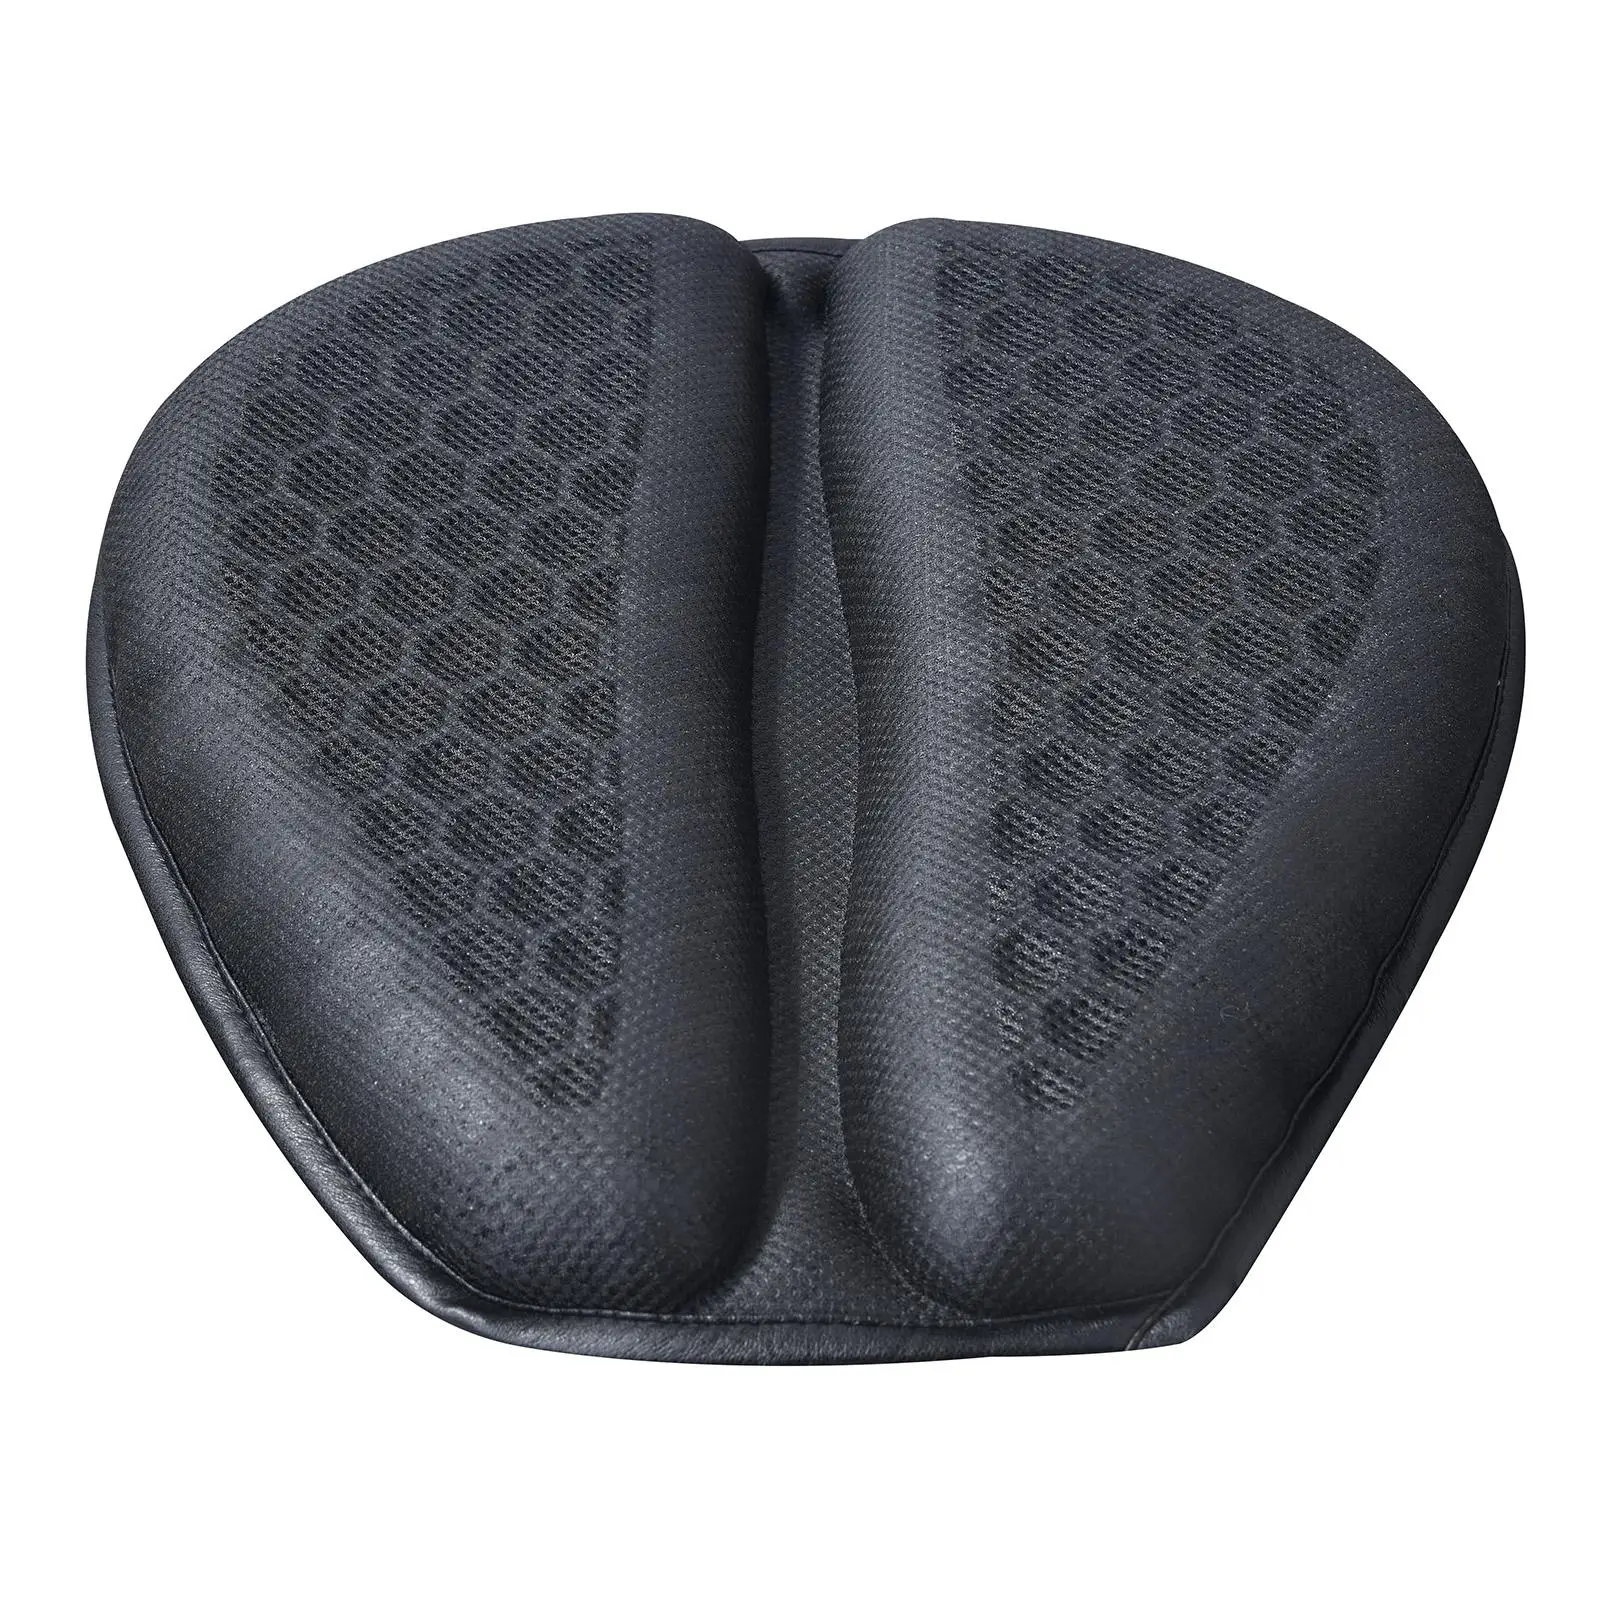 Motorcycle Seat Cushion Cover, Shock Absorb Seat Pad for Dirt Bikes Professional Riders Black